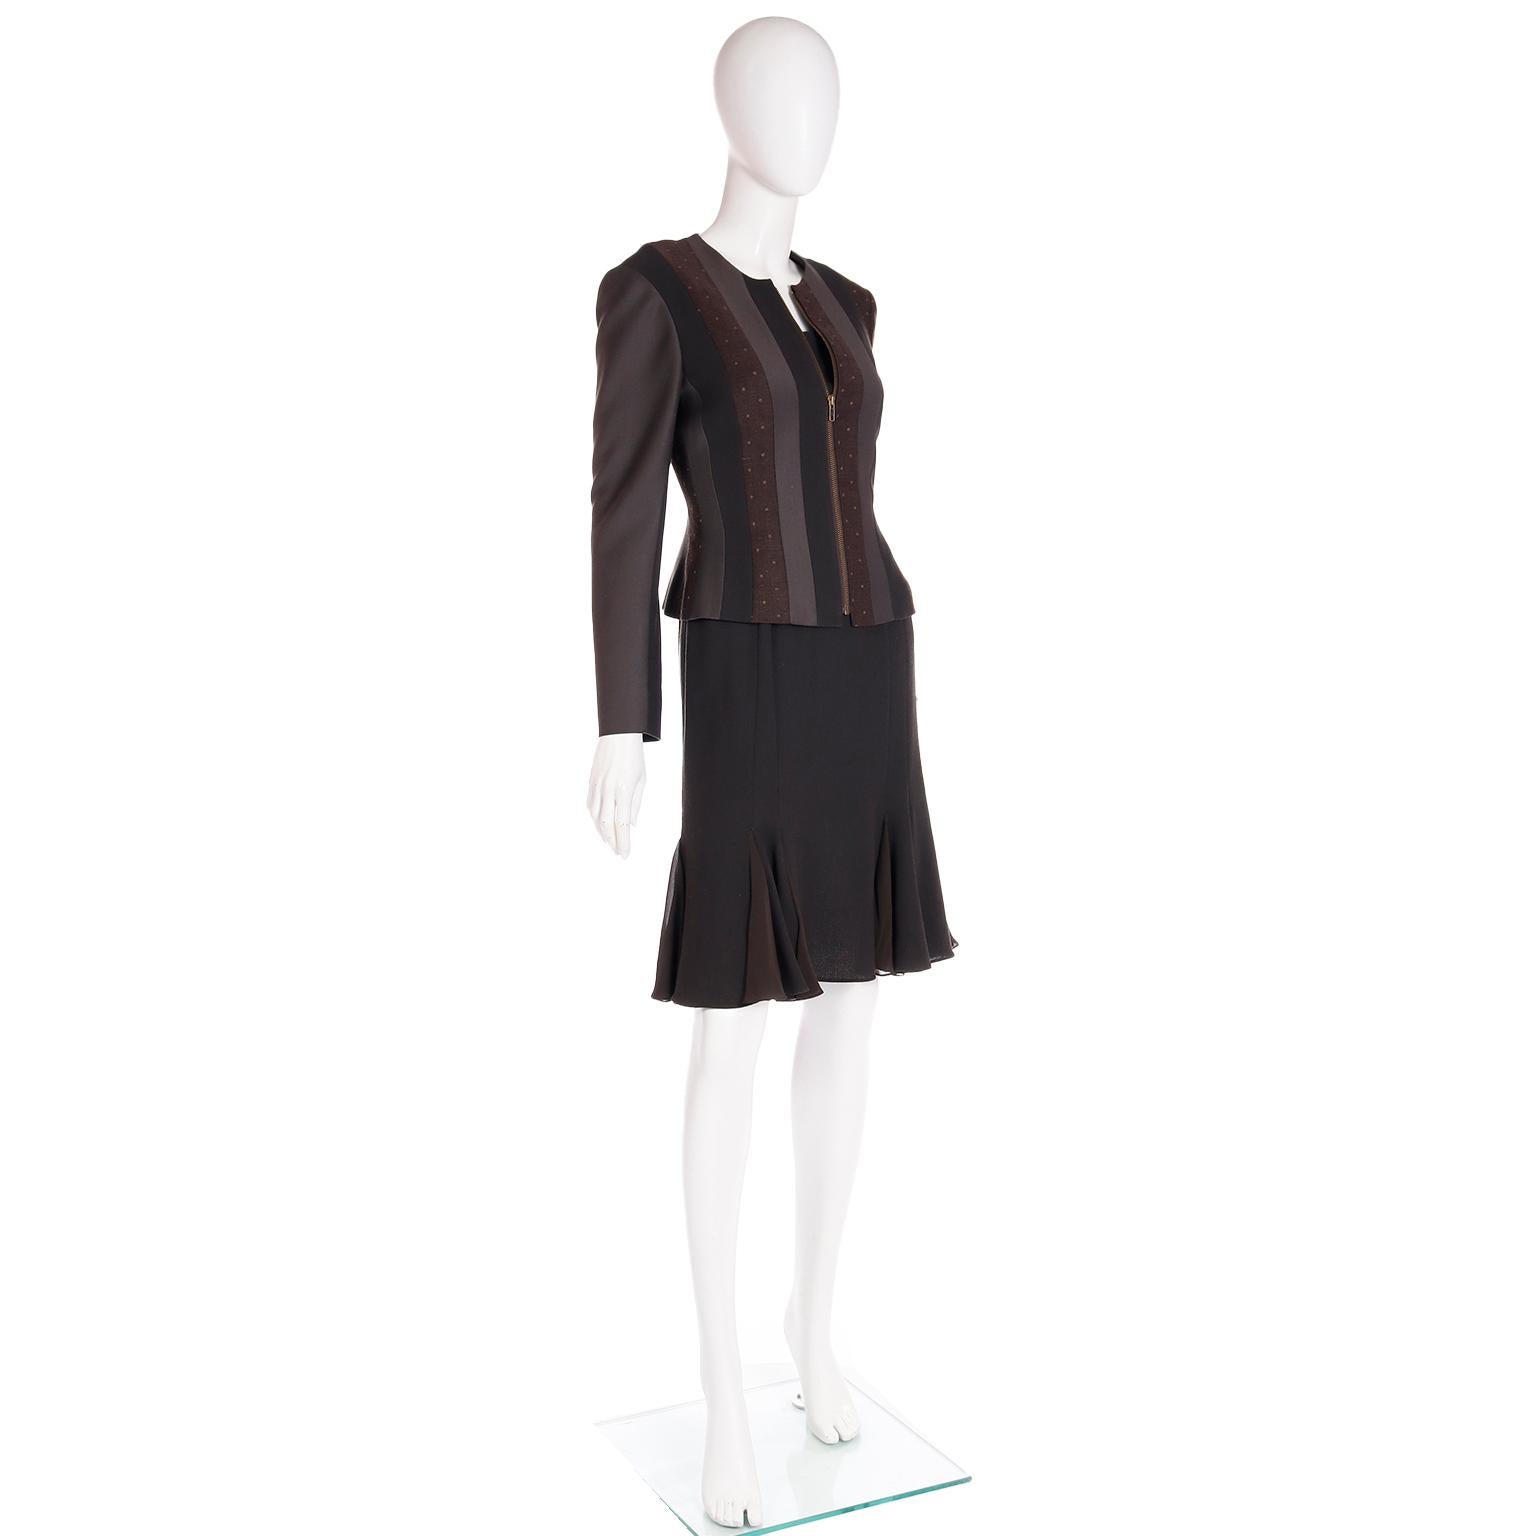 2002 John Galliano Vintage Striped Zip Front Jacket and Godet Dress Ensemble In Excellent Condition For Sale In Portland, OR